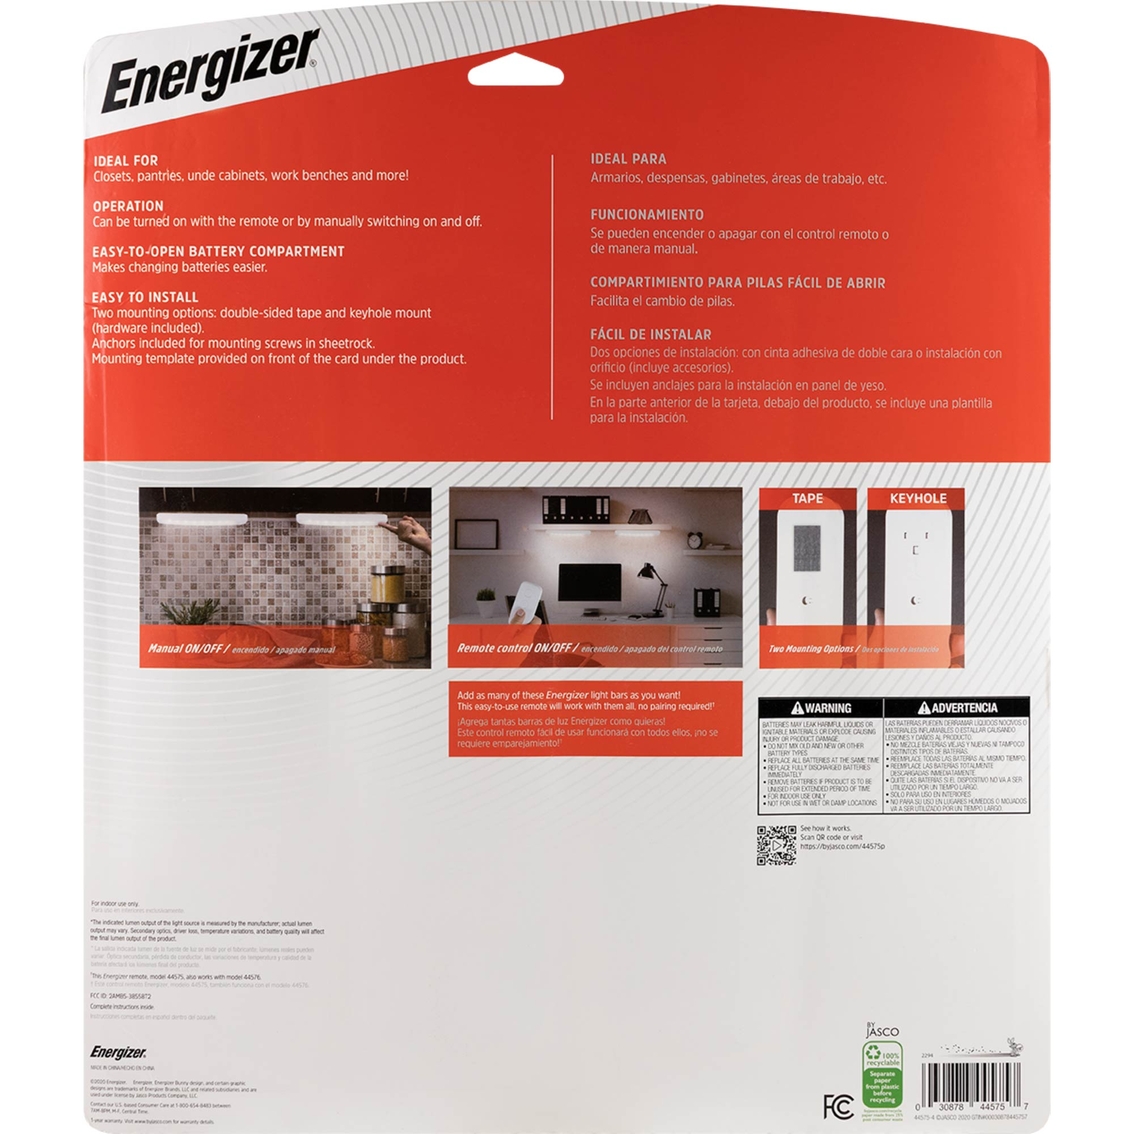 Energizer 10 in. Battery Operated LED Light Bar with Remote, 3 pk., White - Image 4 of 8